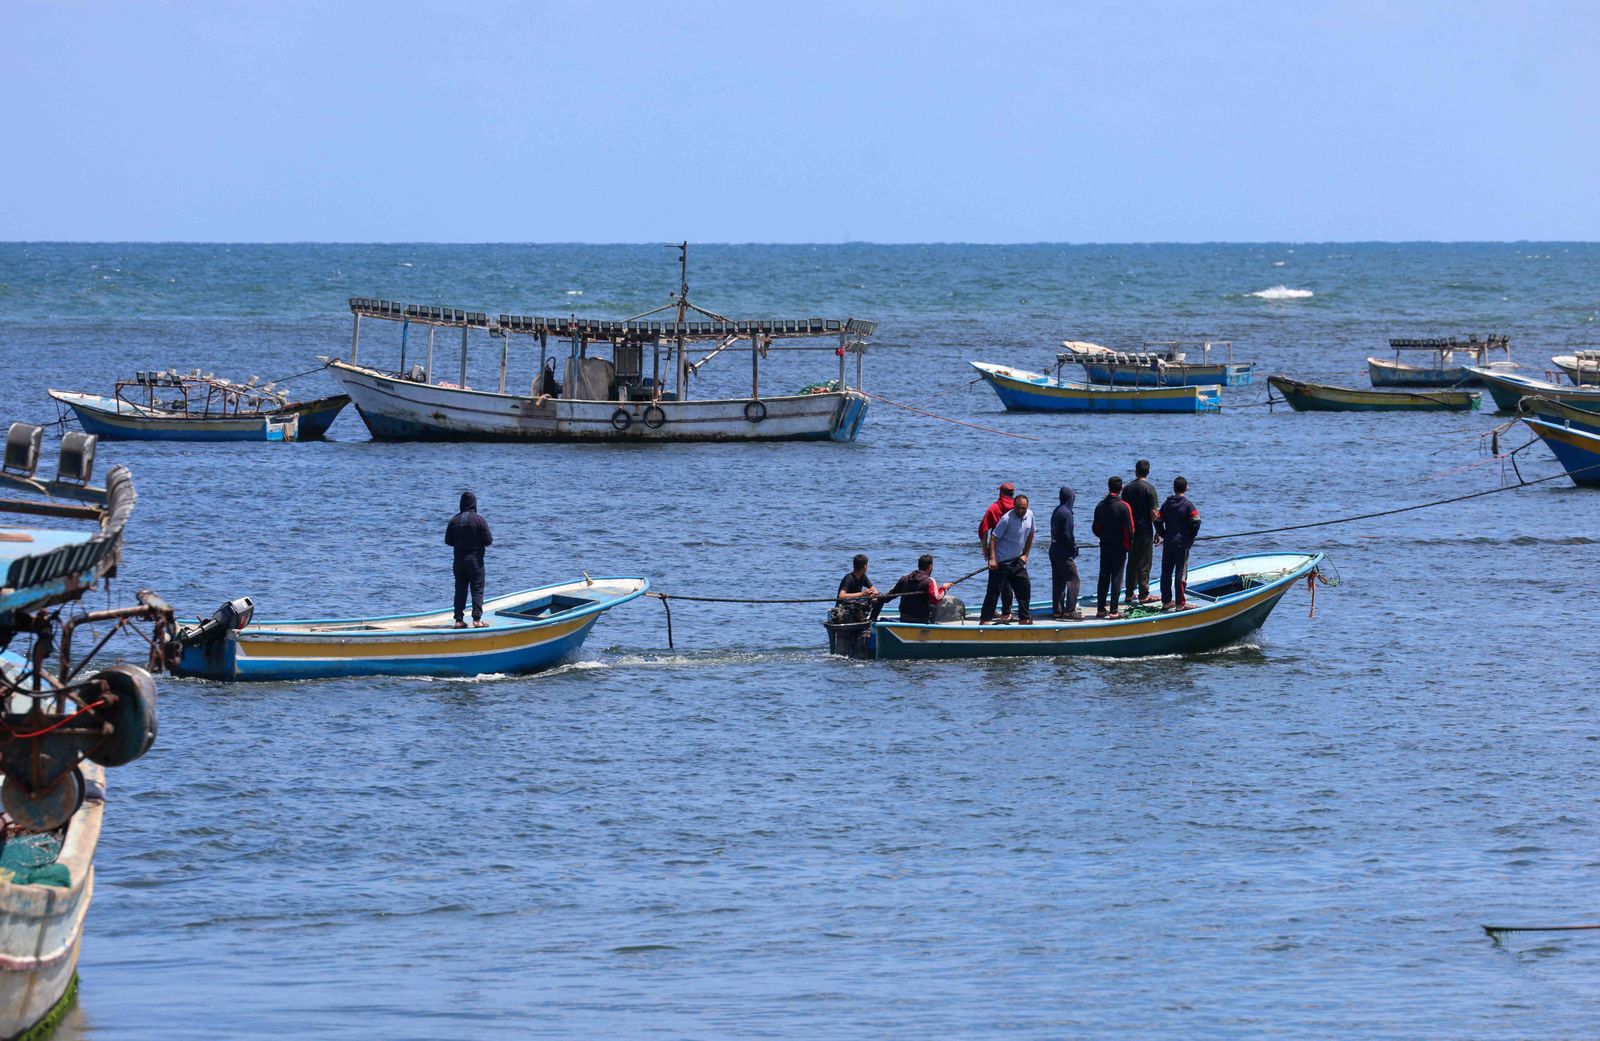 Palestinian fishermen set to sea on their boats after a ban on fishing was lifted, at the main port in Gaza City on May 22, 2021, following a ceasefire between Israel and Palestinian militants in the Israeli-blockaded enclave. - As the ceasefire holds, humanitarian aid began to enter the enclave ravaged by 11 days of bloodshed. While thousands of displaced Palestinians returned to their homes, and Israelis began to resume normal life a day earlier, international focus turned to the reconstruction of the bomb-shattered Gaza Strip. (Photo by Emmanuel DUNAND / AFP) - AFP